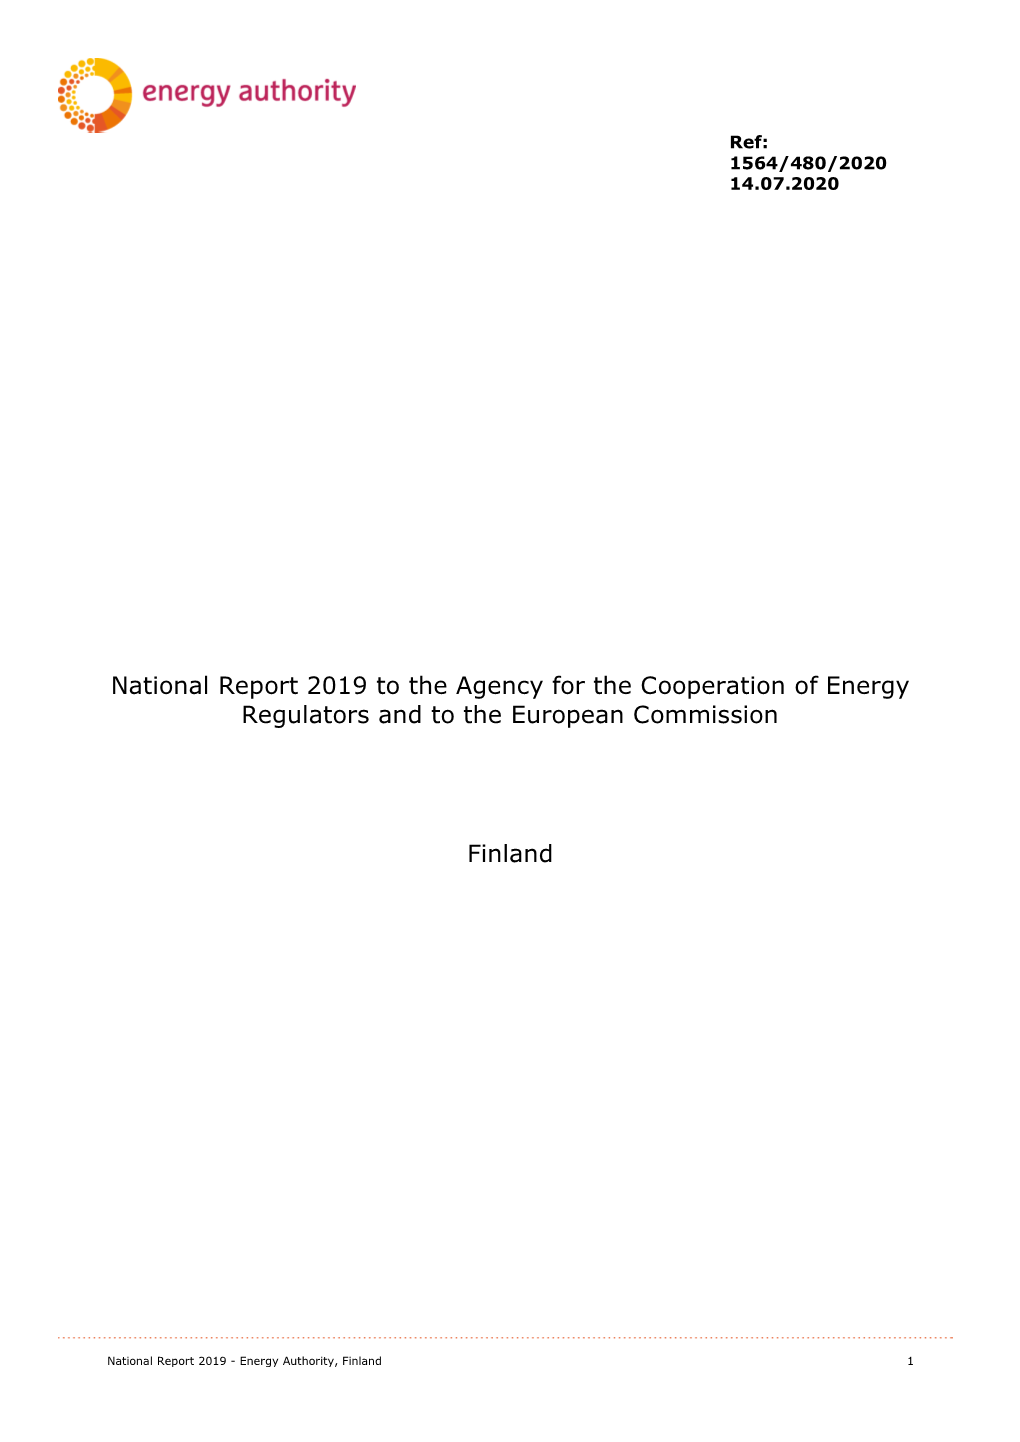 National Report 2019 to the Agency for the Cooperation of Energy Regulators and to the European Commission